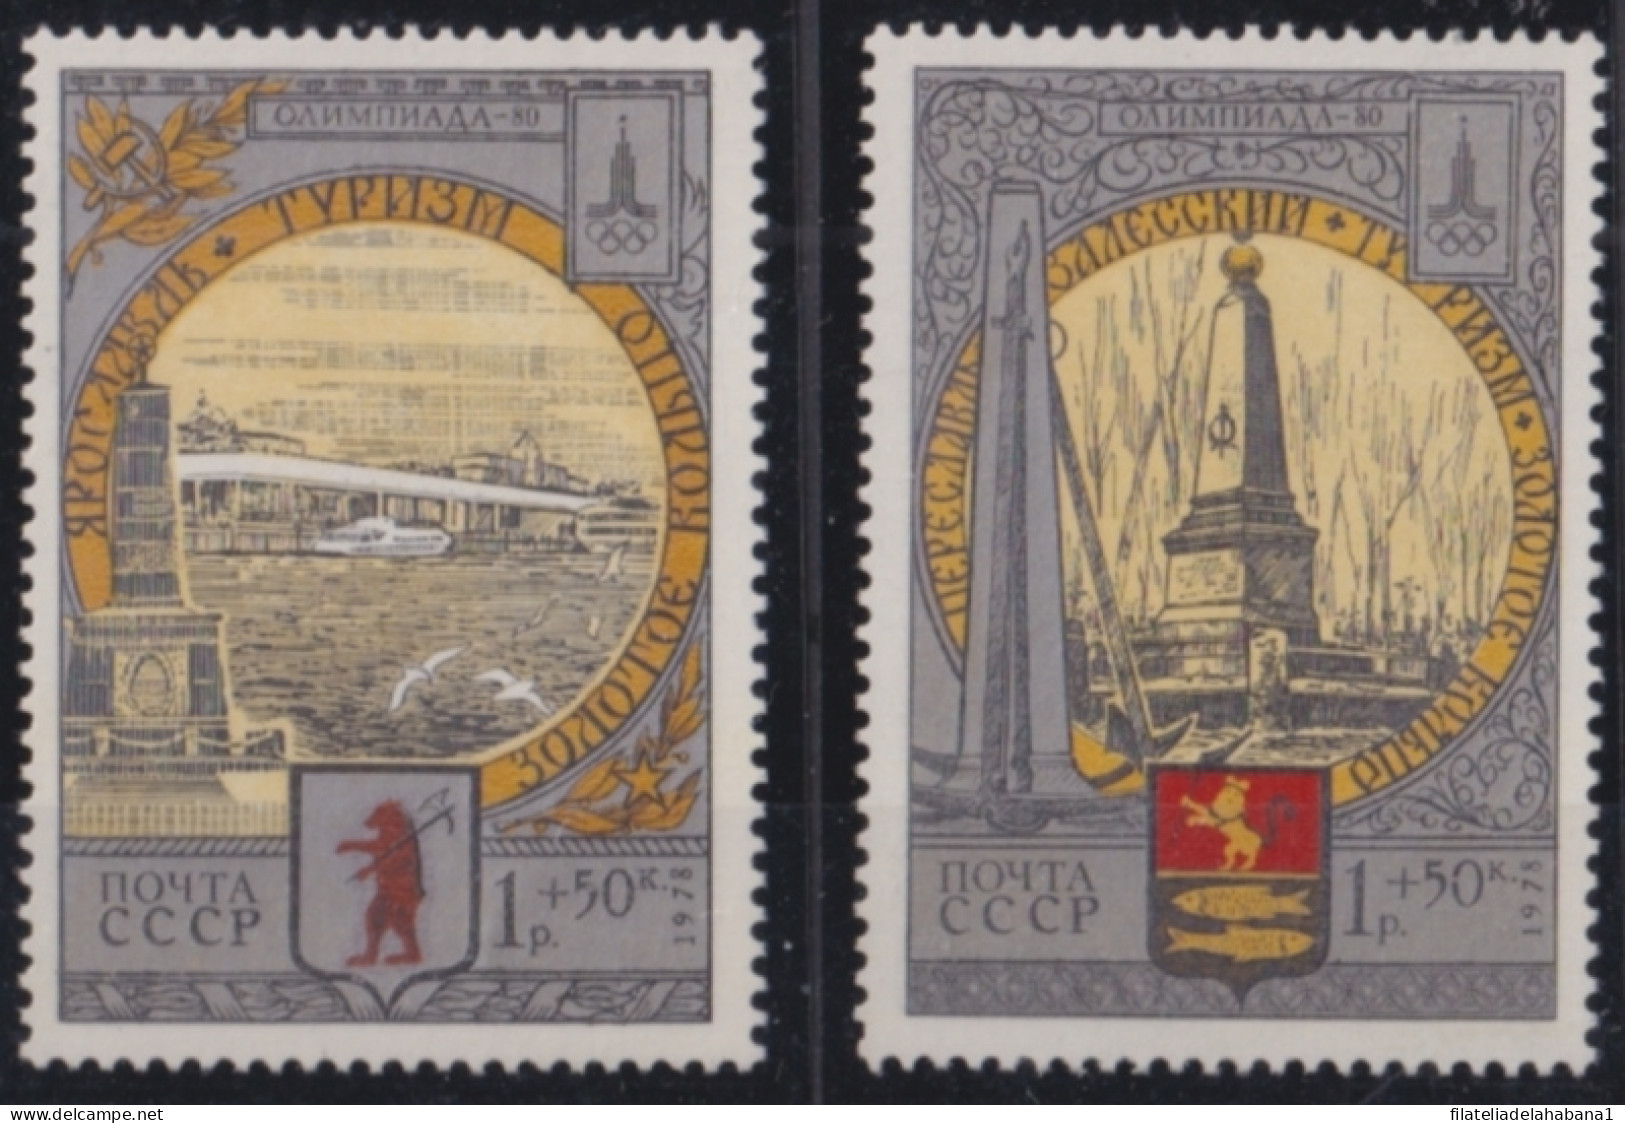 F-EX50227 RUSSIA MNH 1978 OLYMPIC GAMES MOSCOW TOURISM CITY.  - Verano 1980: Moscu